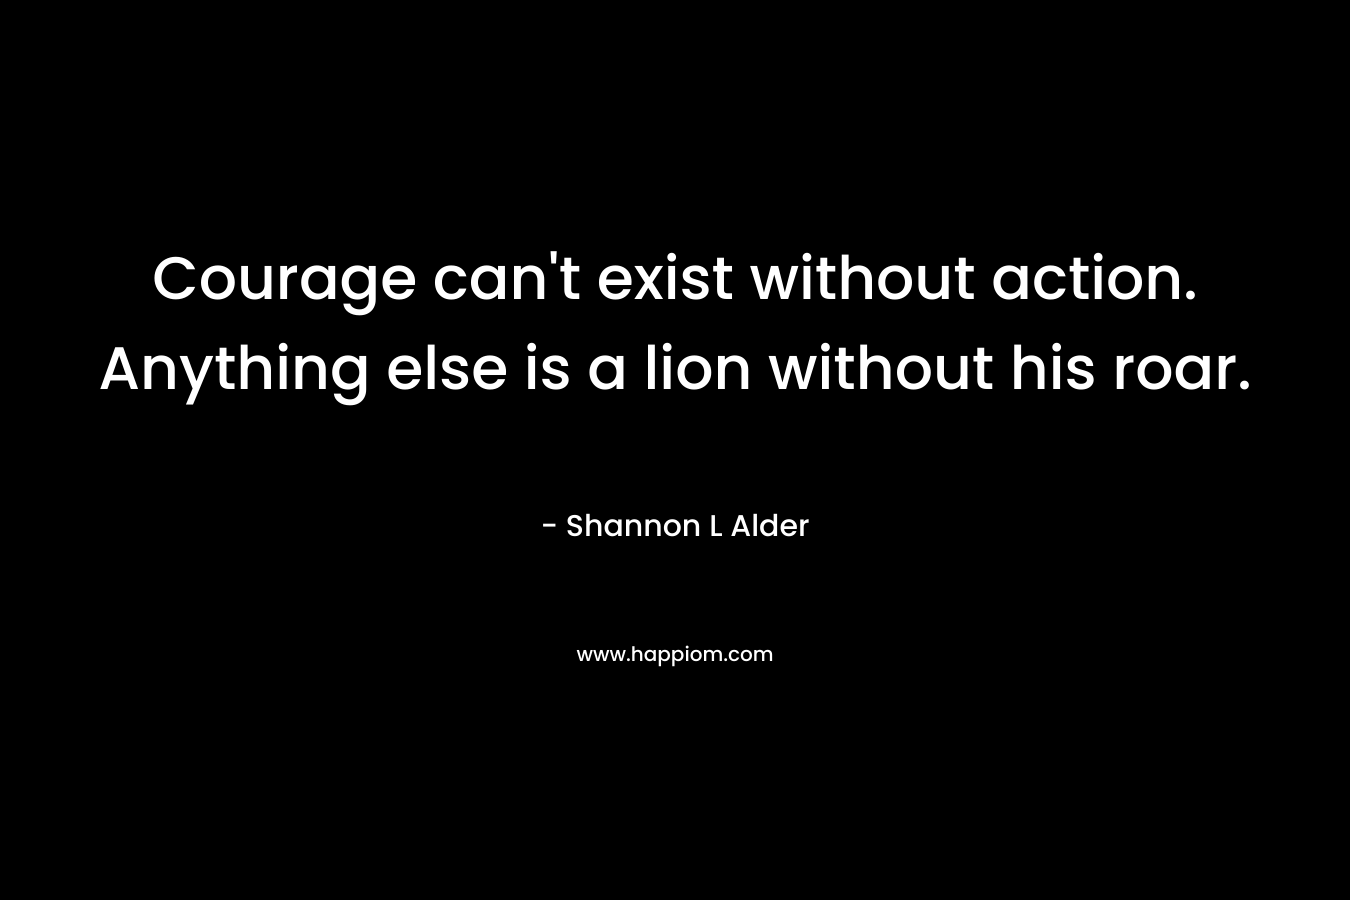 Courage can't exist without action. Anything else is a lion without his roar.